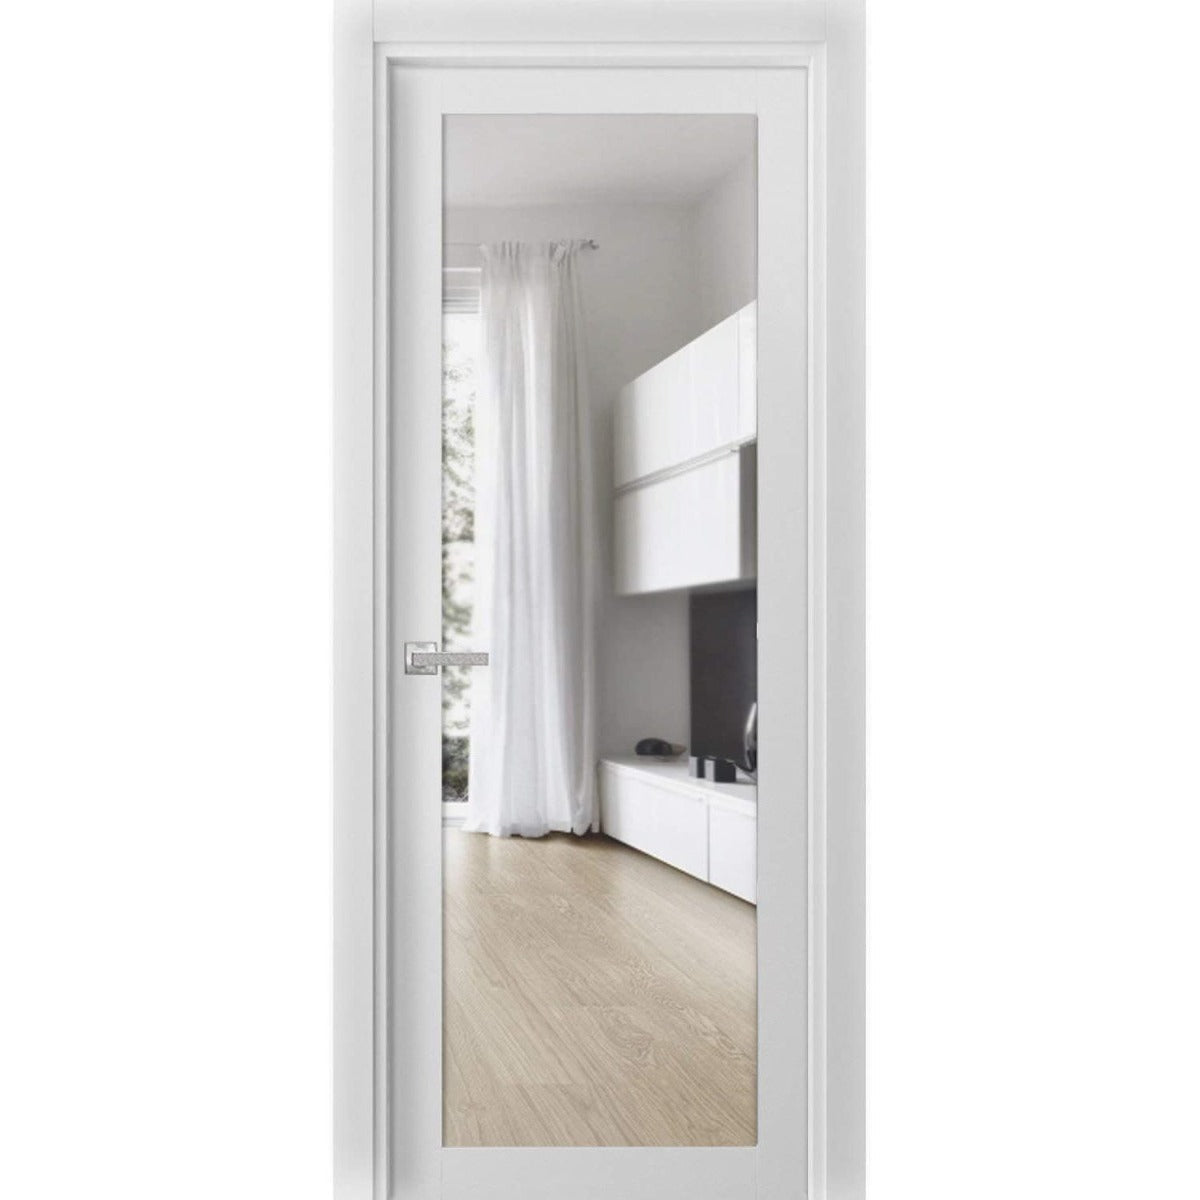 Solid French Door | Lucia 2166 White Silk with Clear Glass | Single Regular Panel Frame Trims Handle | Bathroom Bedroom Sturdy Doors